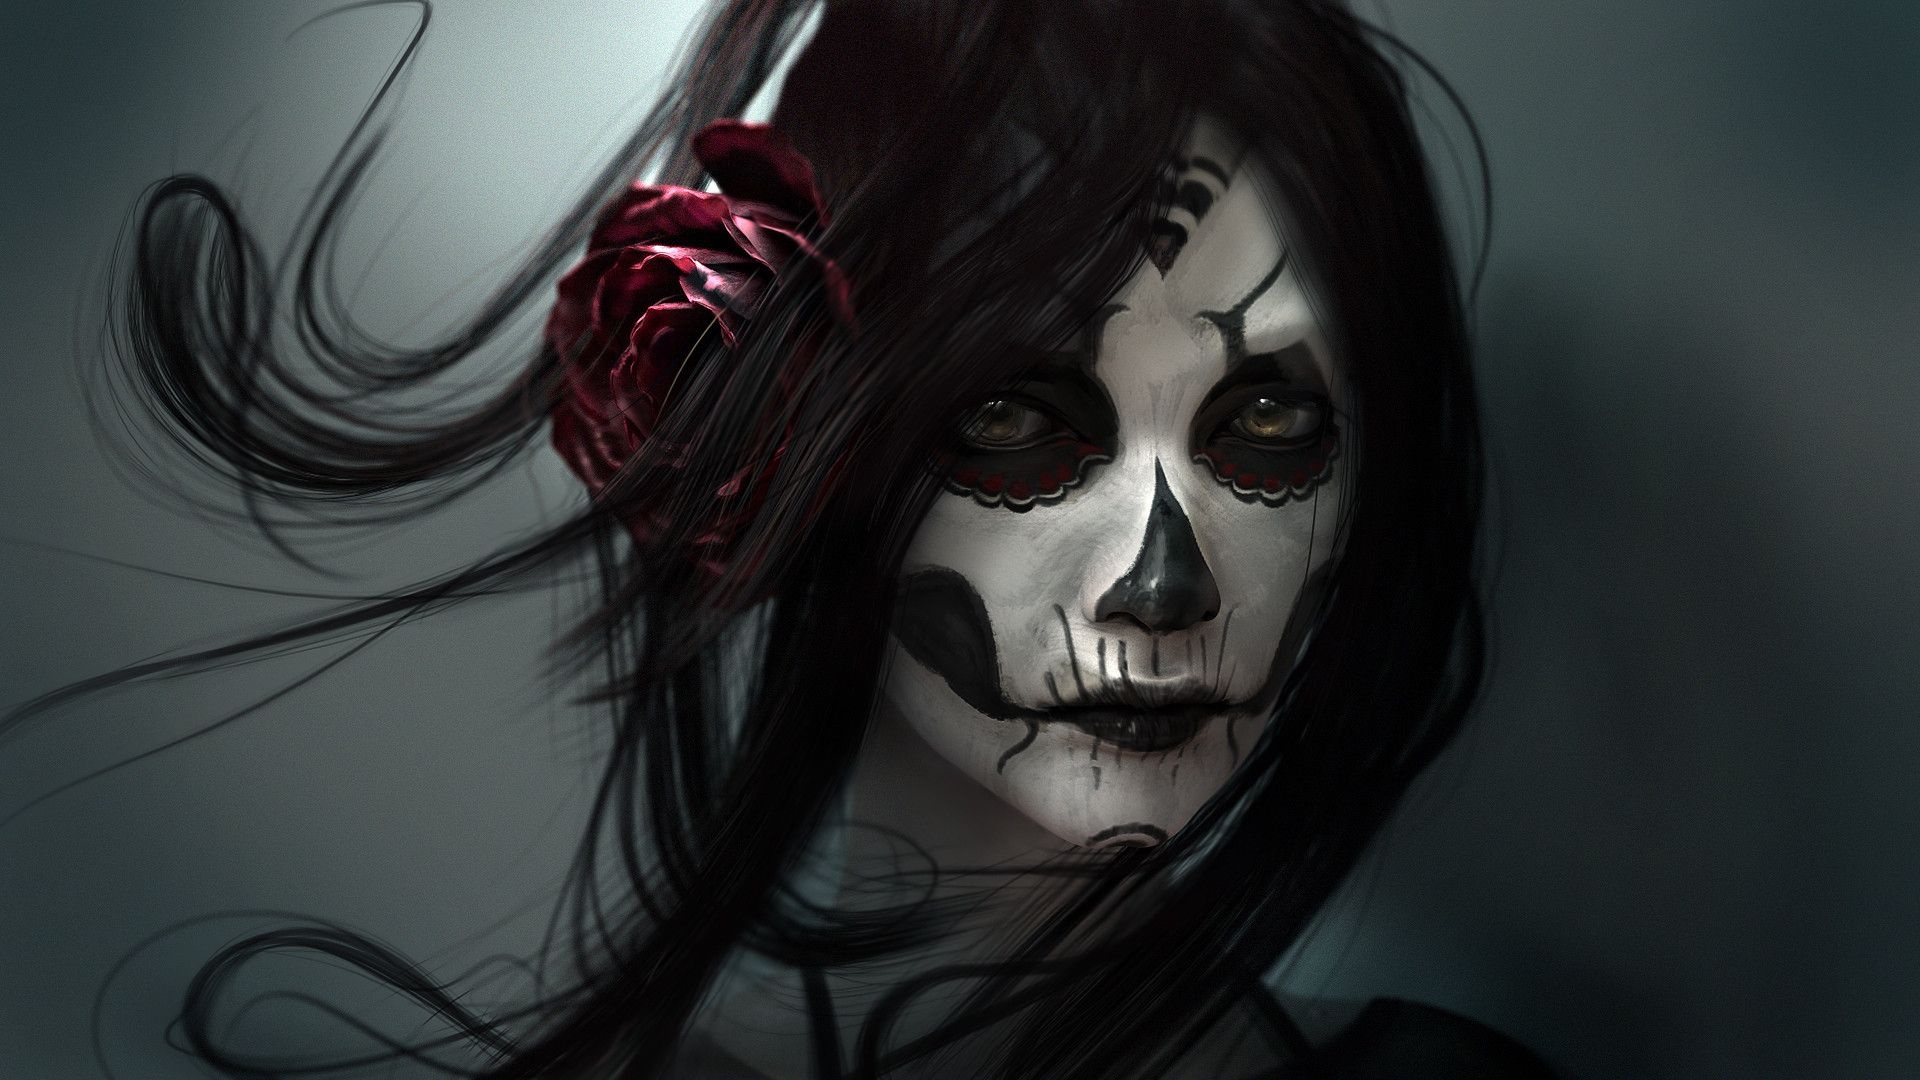 Goth: Face art, Scary, Horror makeup, Dark and morbid aesthetic. 1920x1080 Full HD Background.